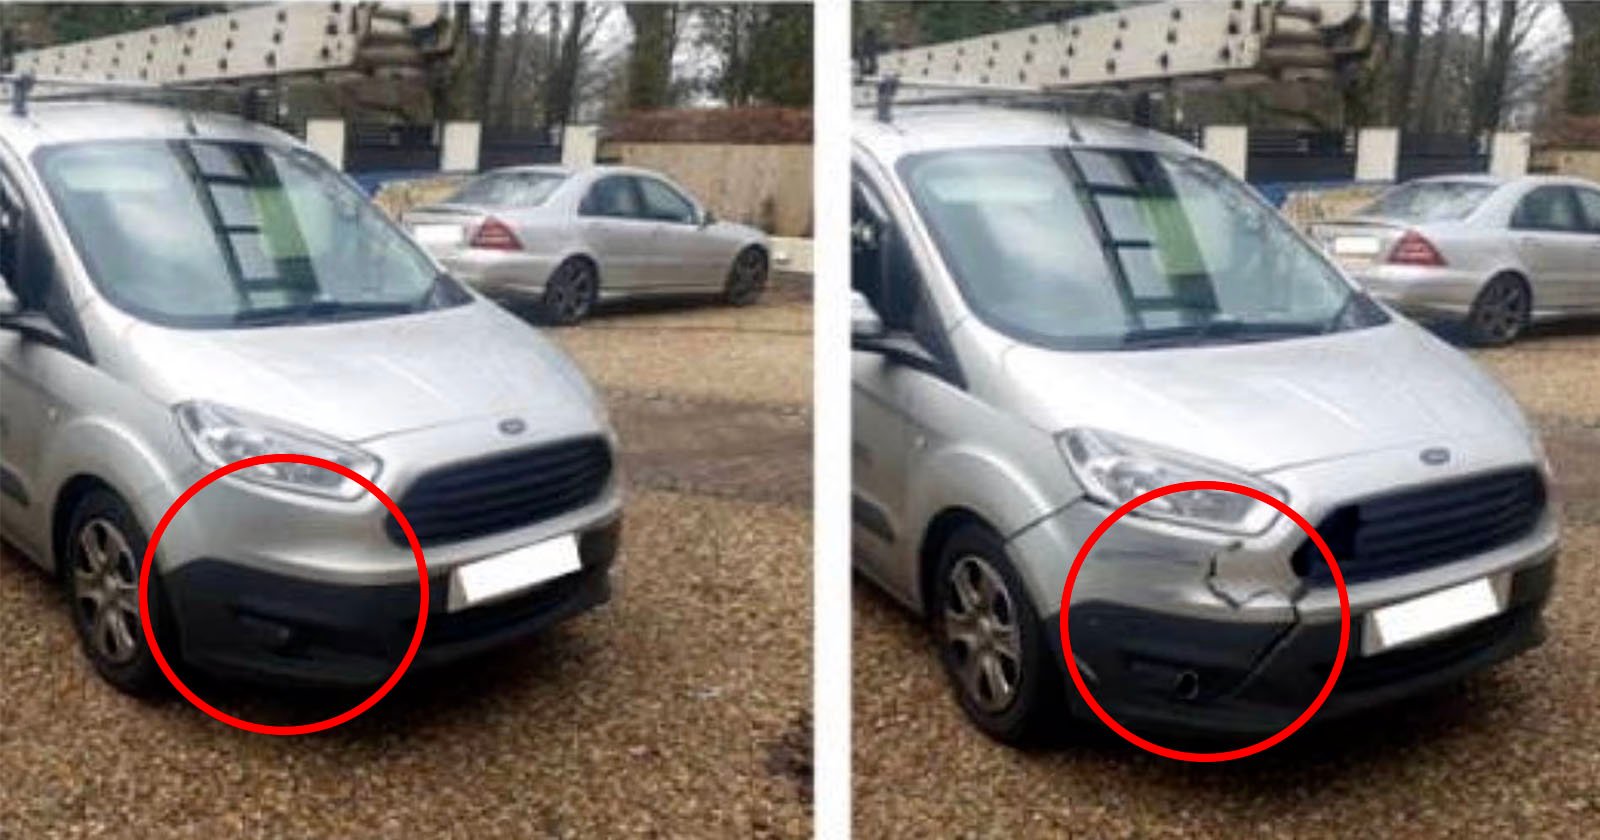  fraudsters are editing photos damaged vehicles claim insurance 